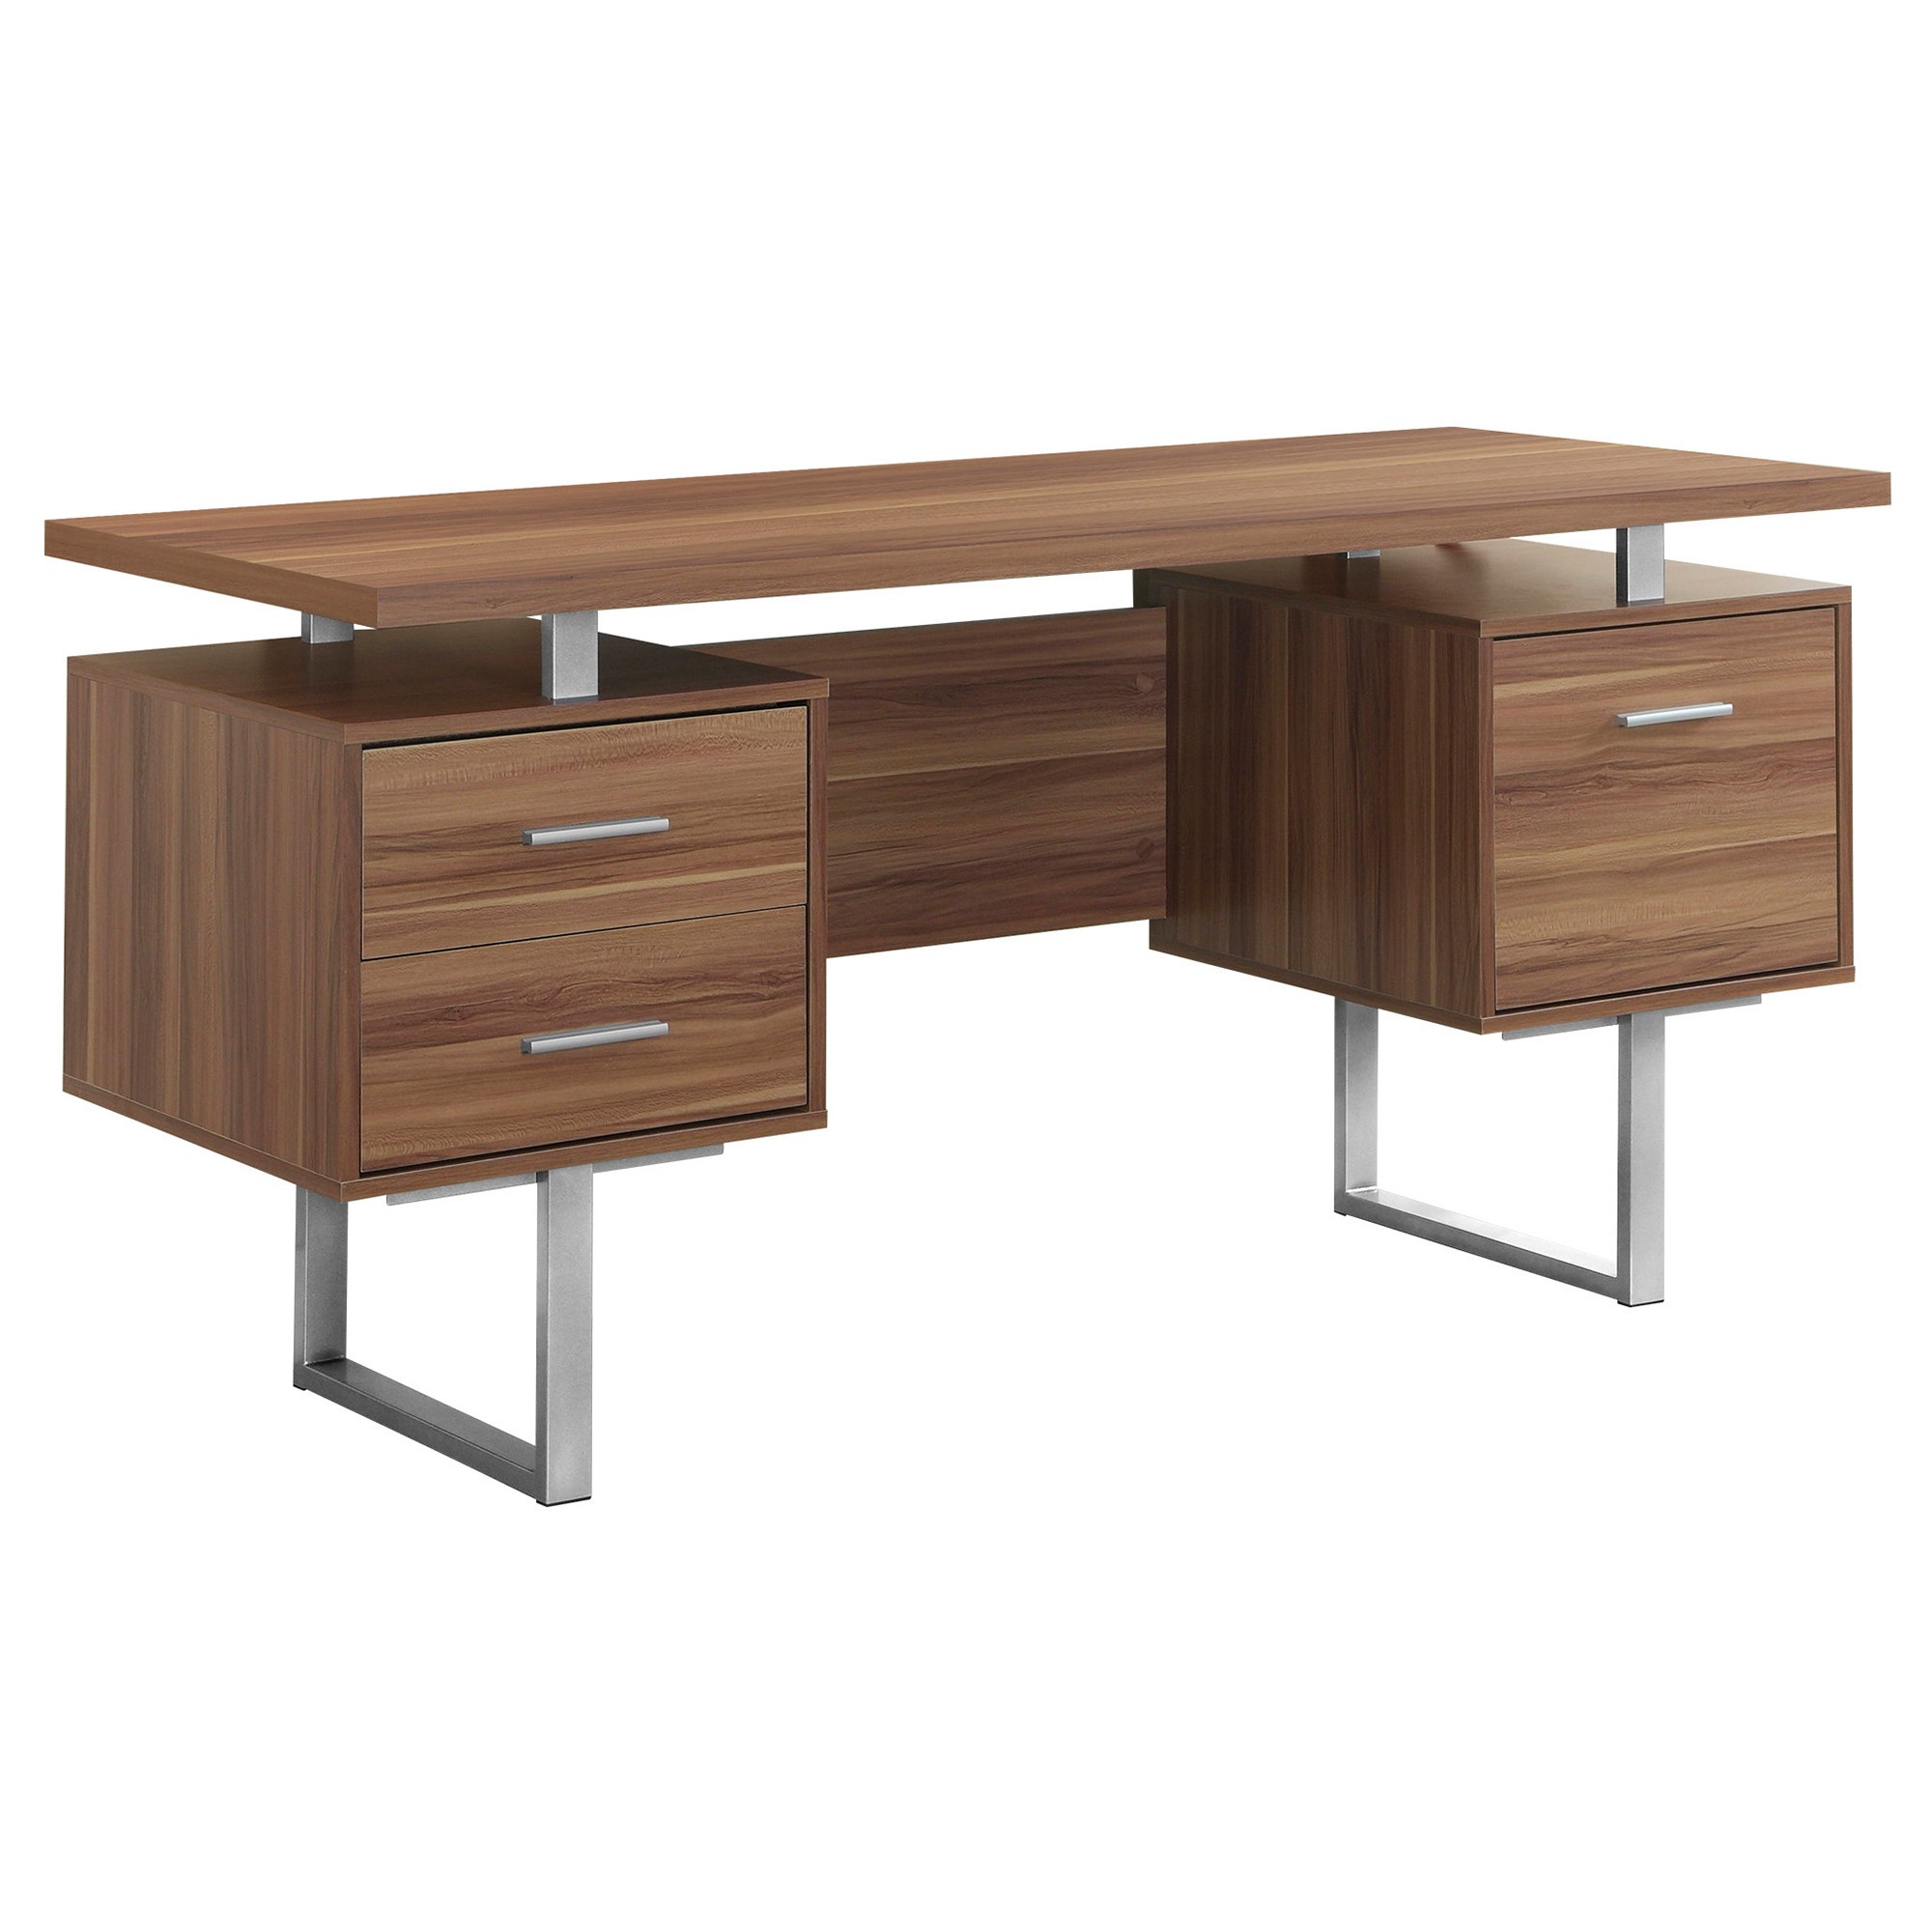 23.75" x 60" x 30.25" Walnut Silver Particle Board Hollow Core Metal Computer Desk With A Hollow Core